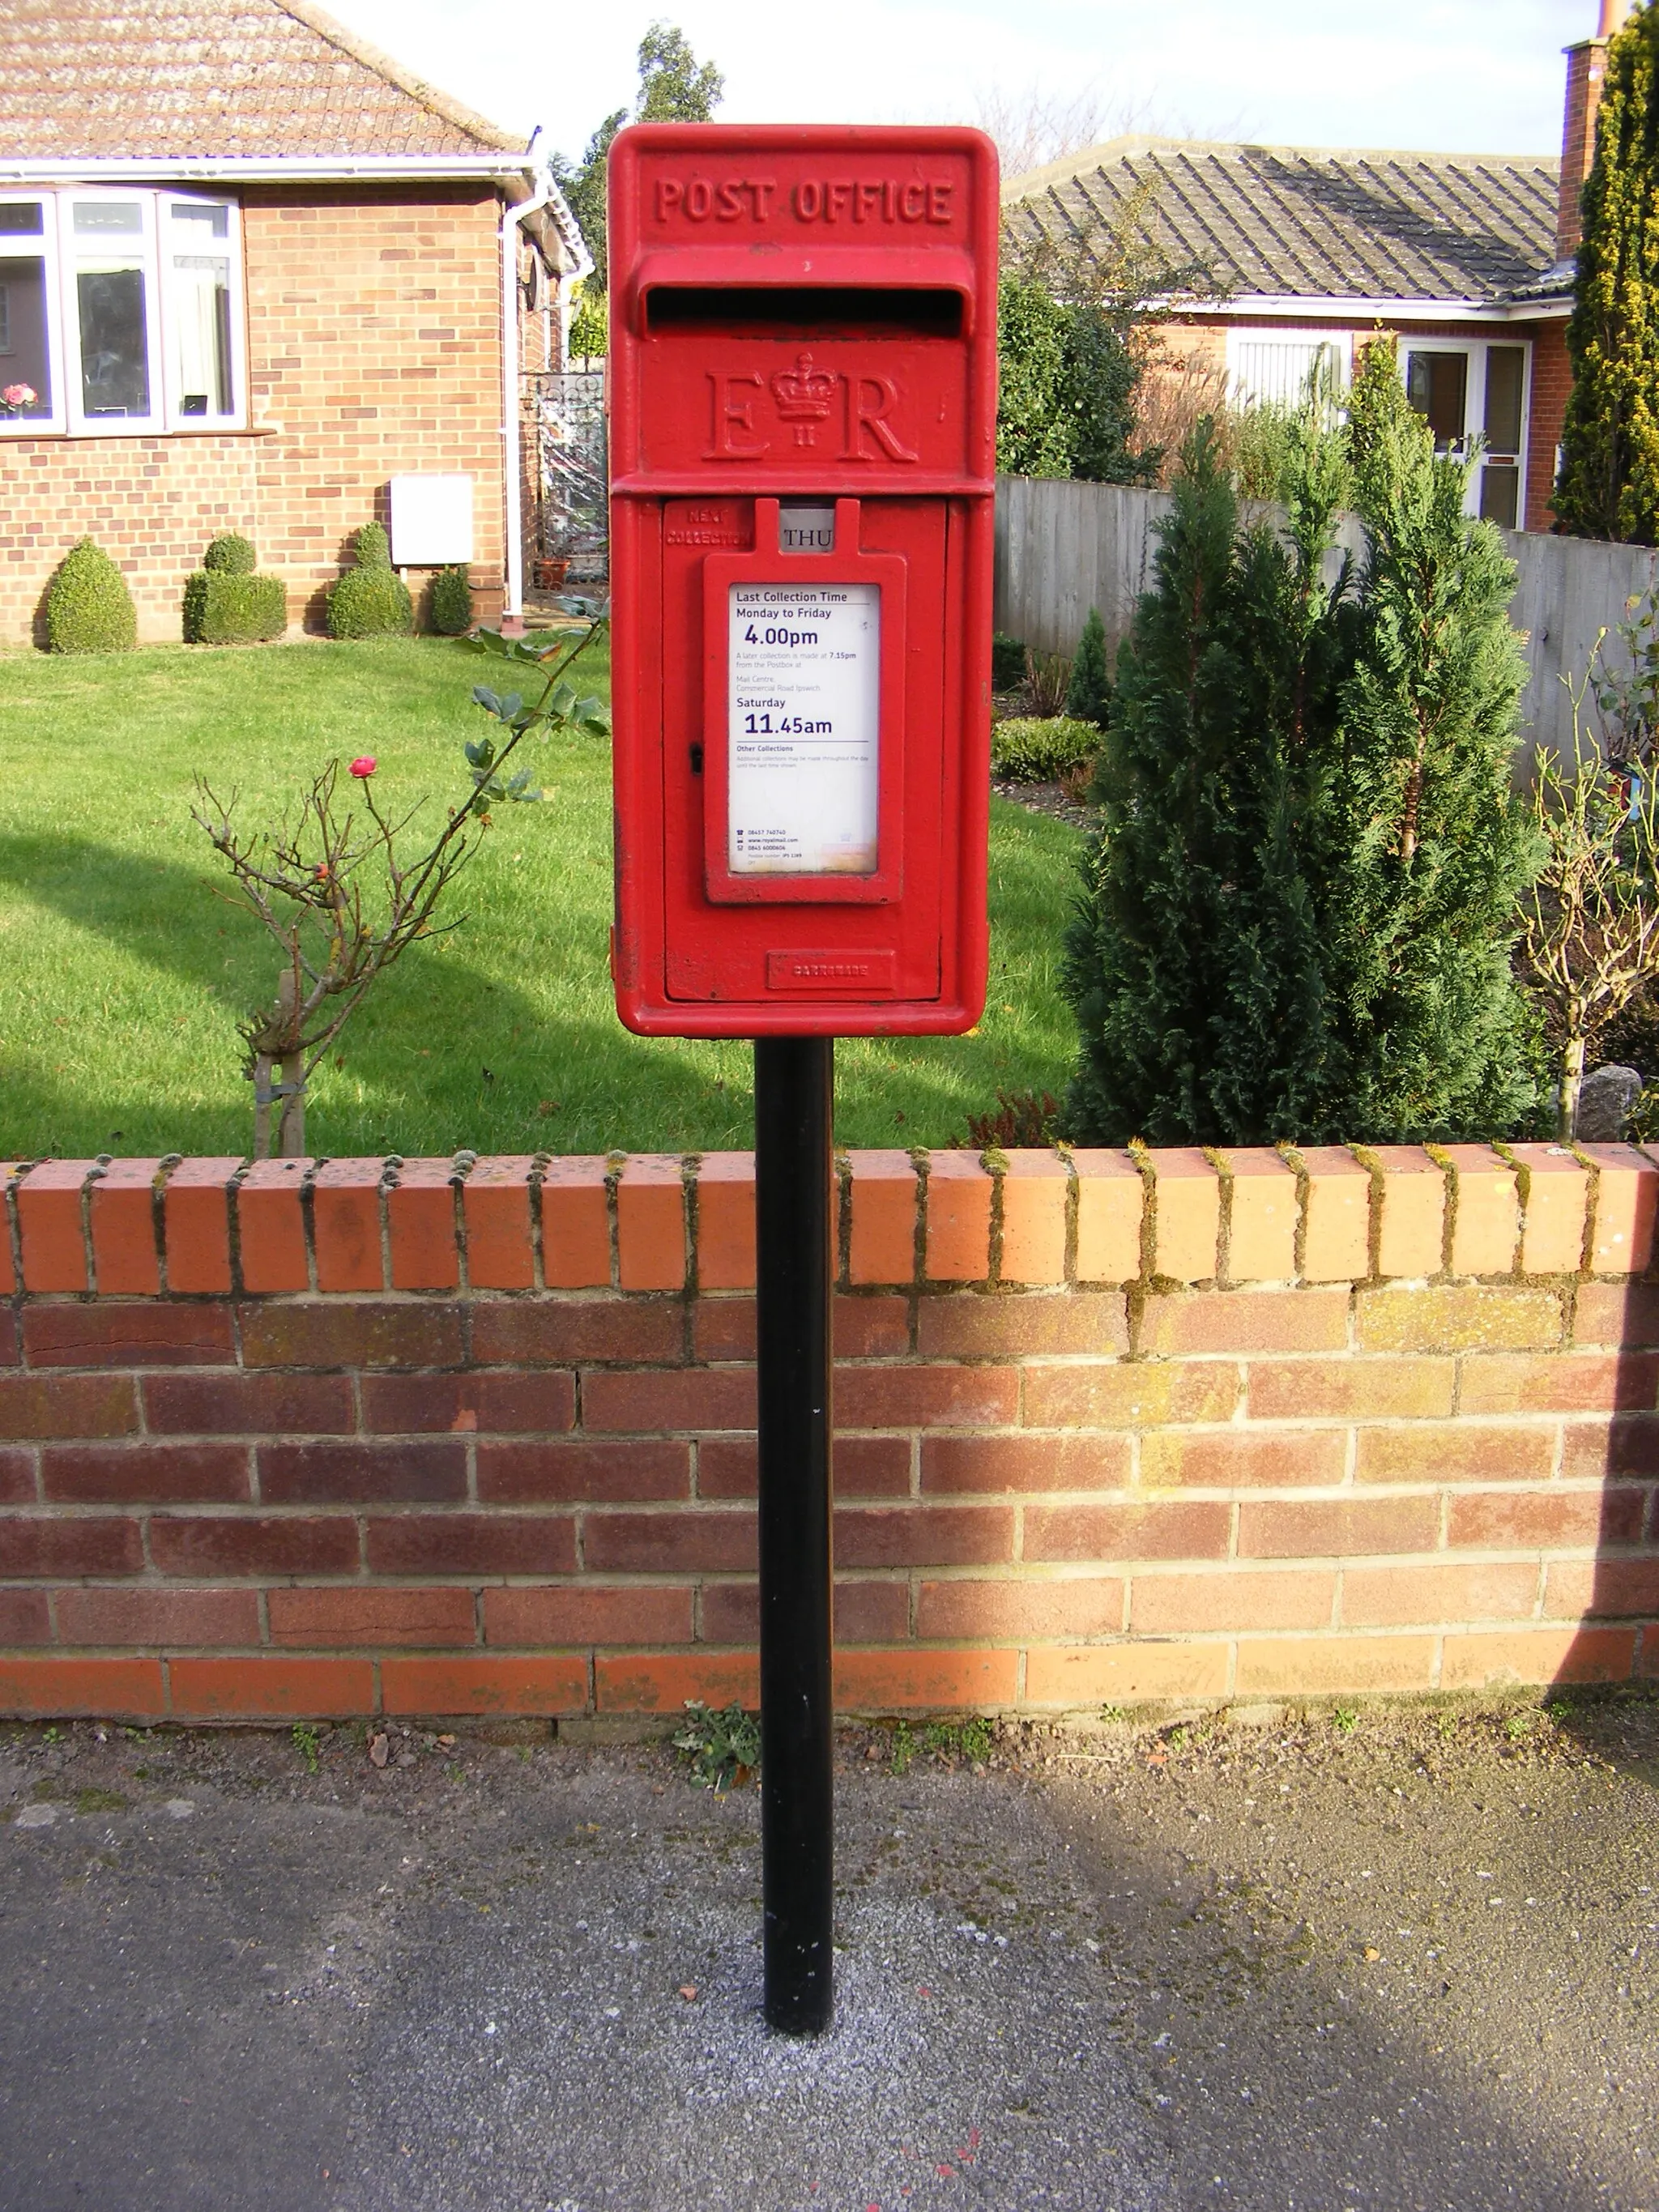 Photo showing: 2 Holly Lane Postbox